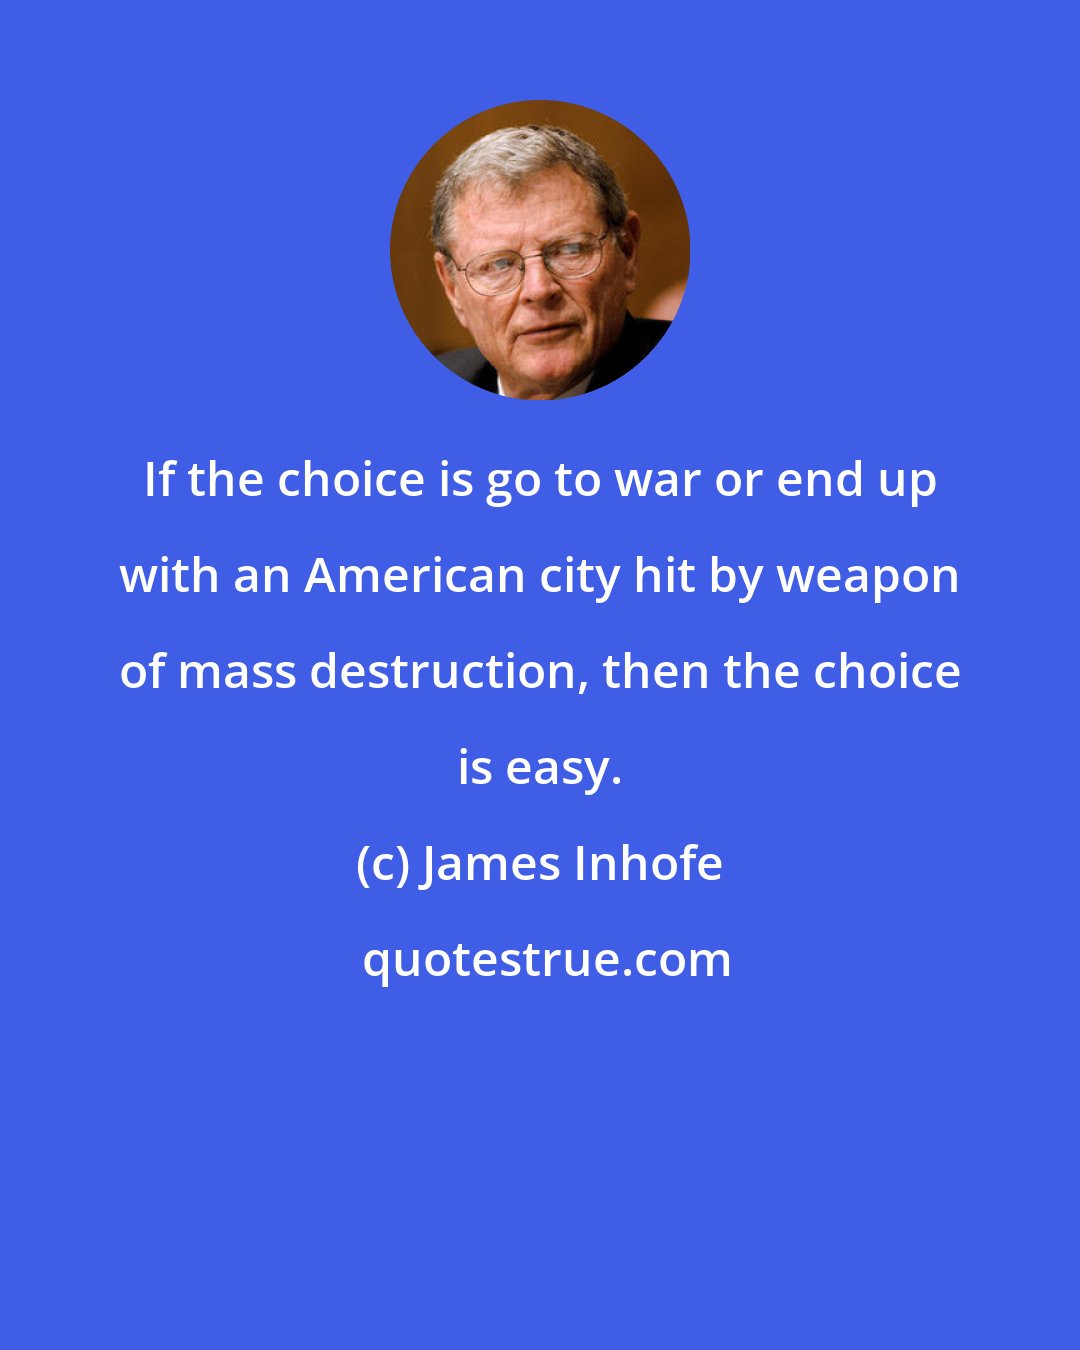 James Inhofe: If the choice is go to war or end up with an American city hit by weapon of mass destruction, then the choice is easy.